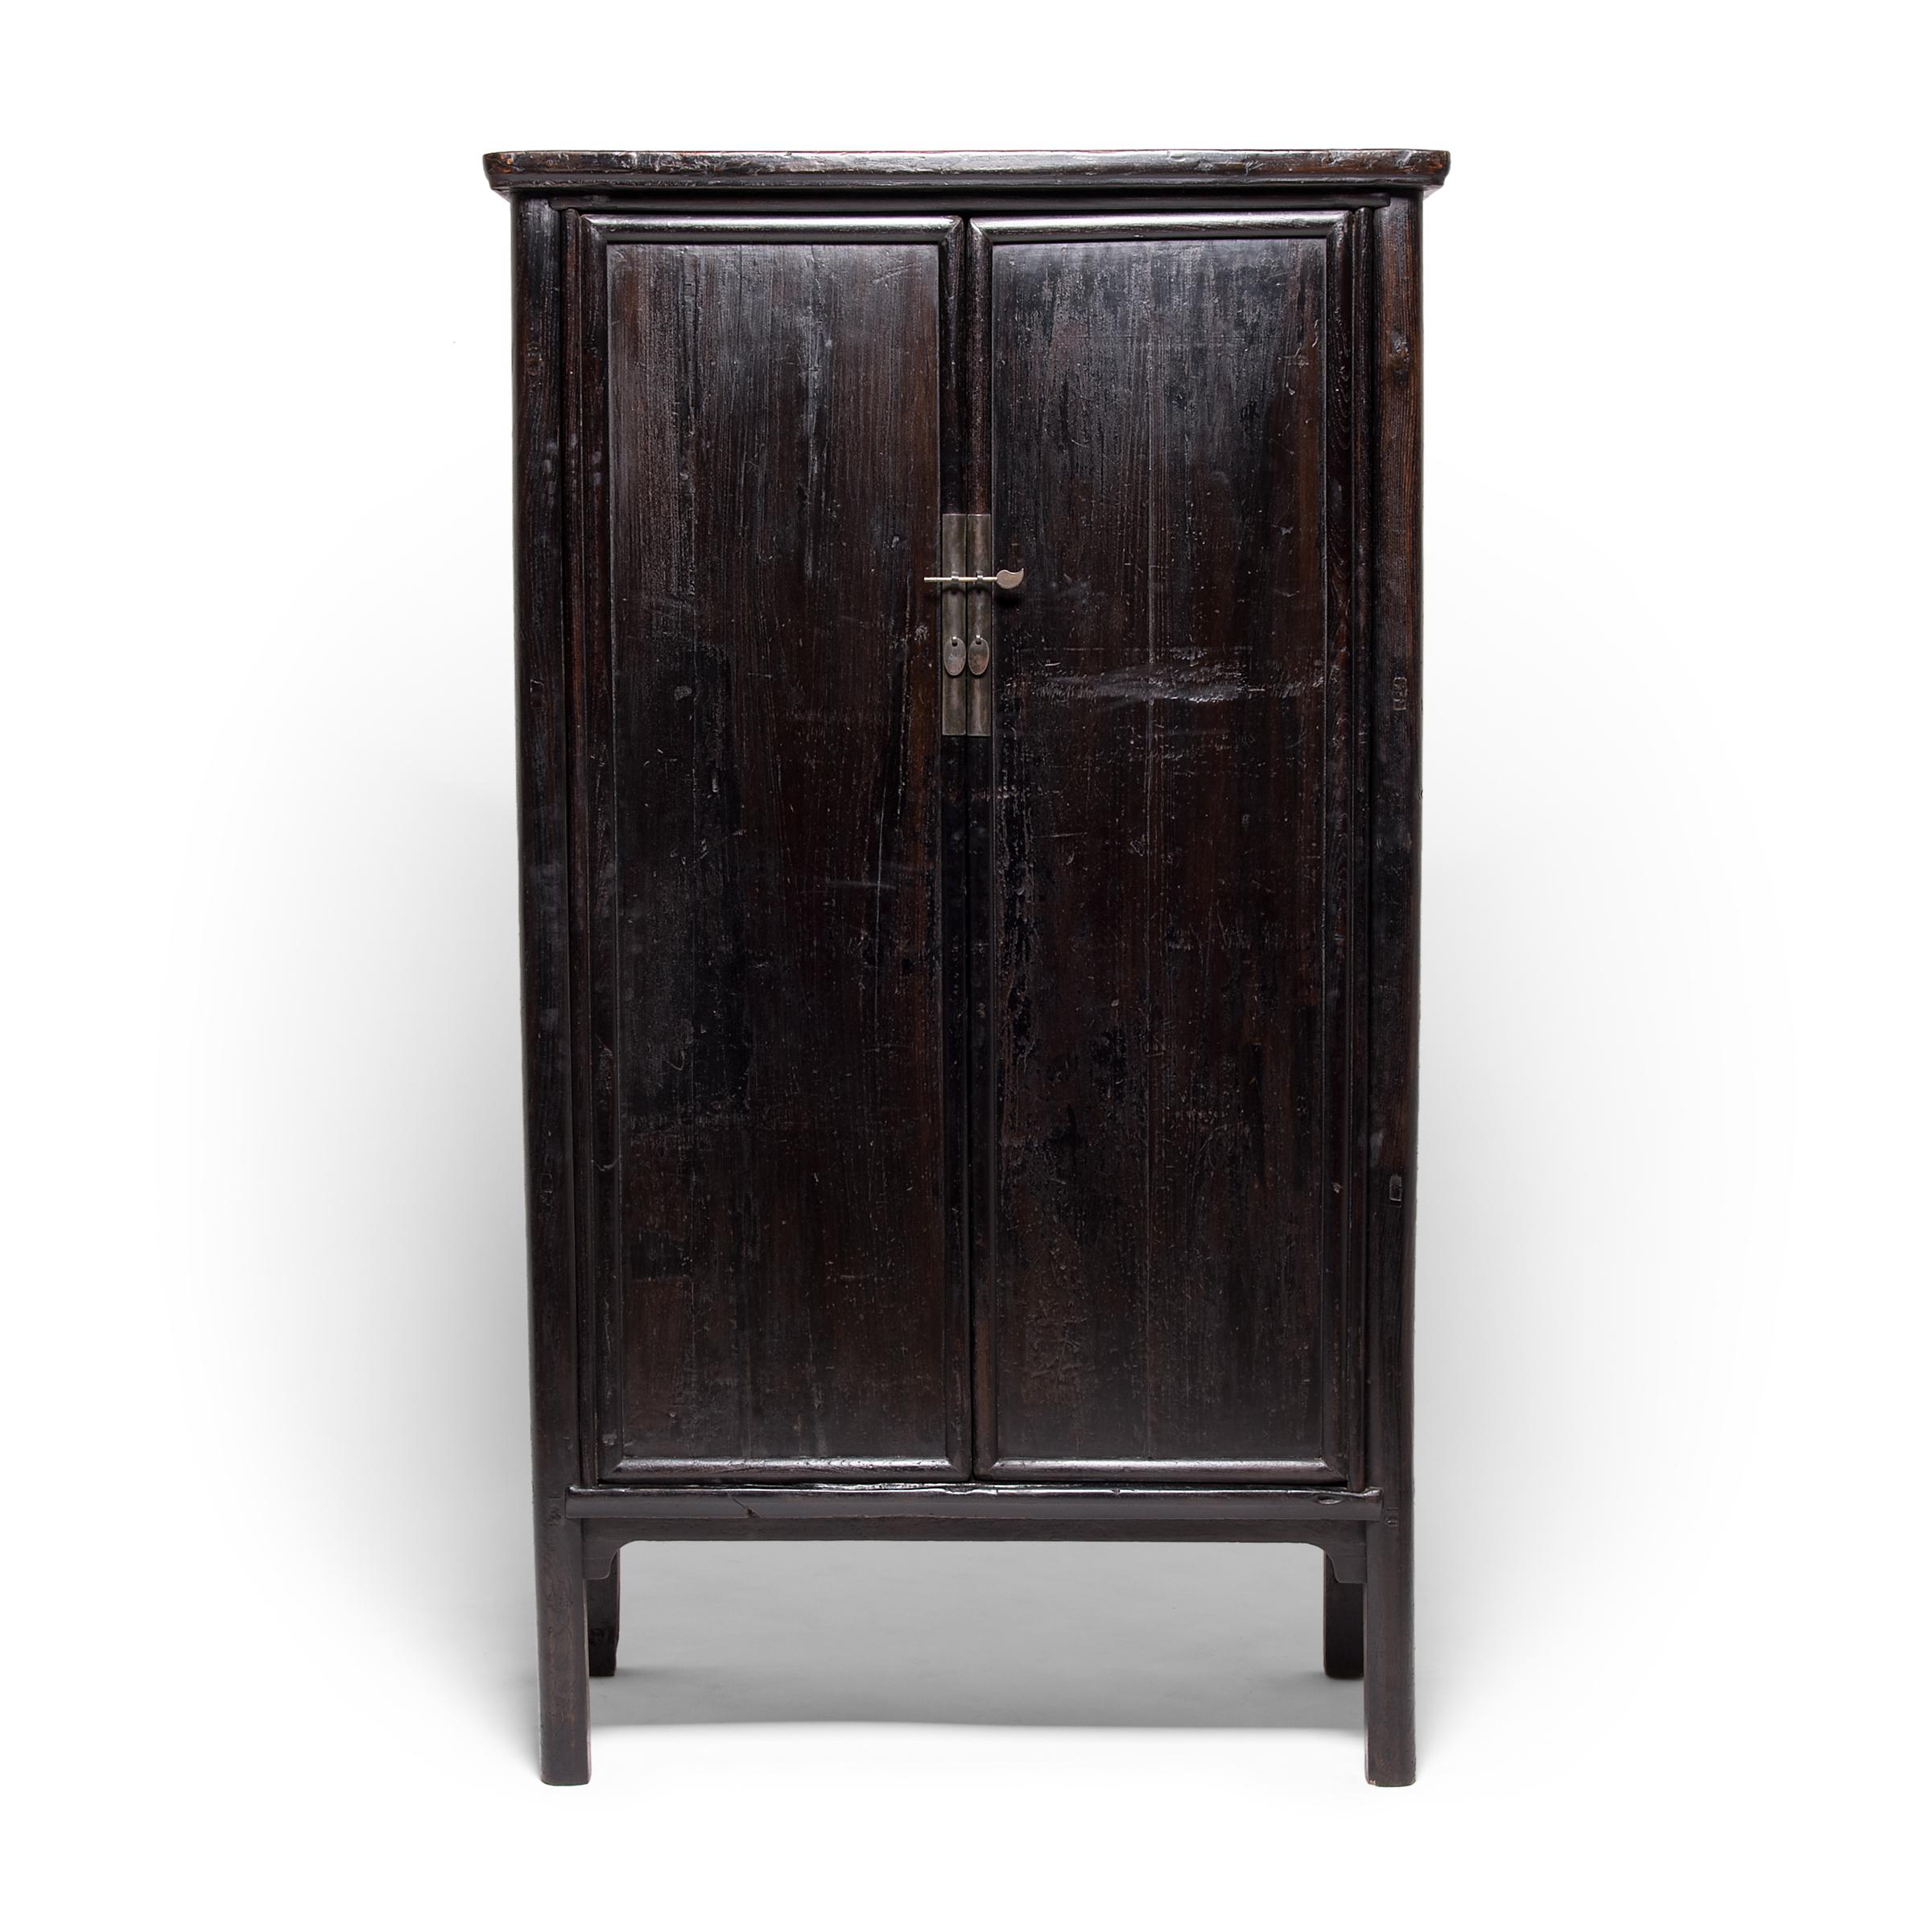 Created in China's Shanxi province, these striking, early 19th-century cabinets take their name from their elegant, rounded wood frames. Austere in their simplicity, the cabinets honor Ming furniture design with clean lines and even finishes,